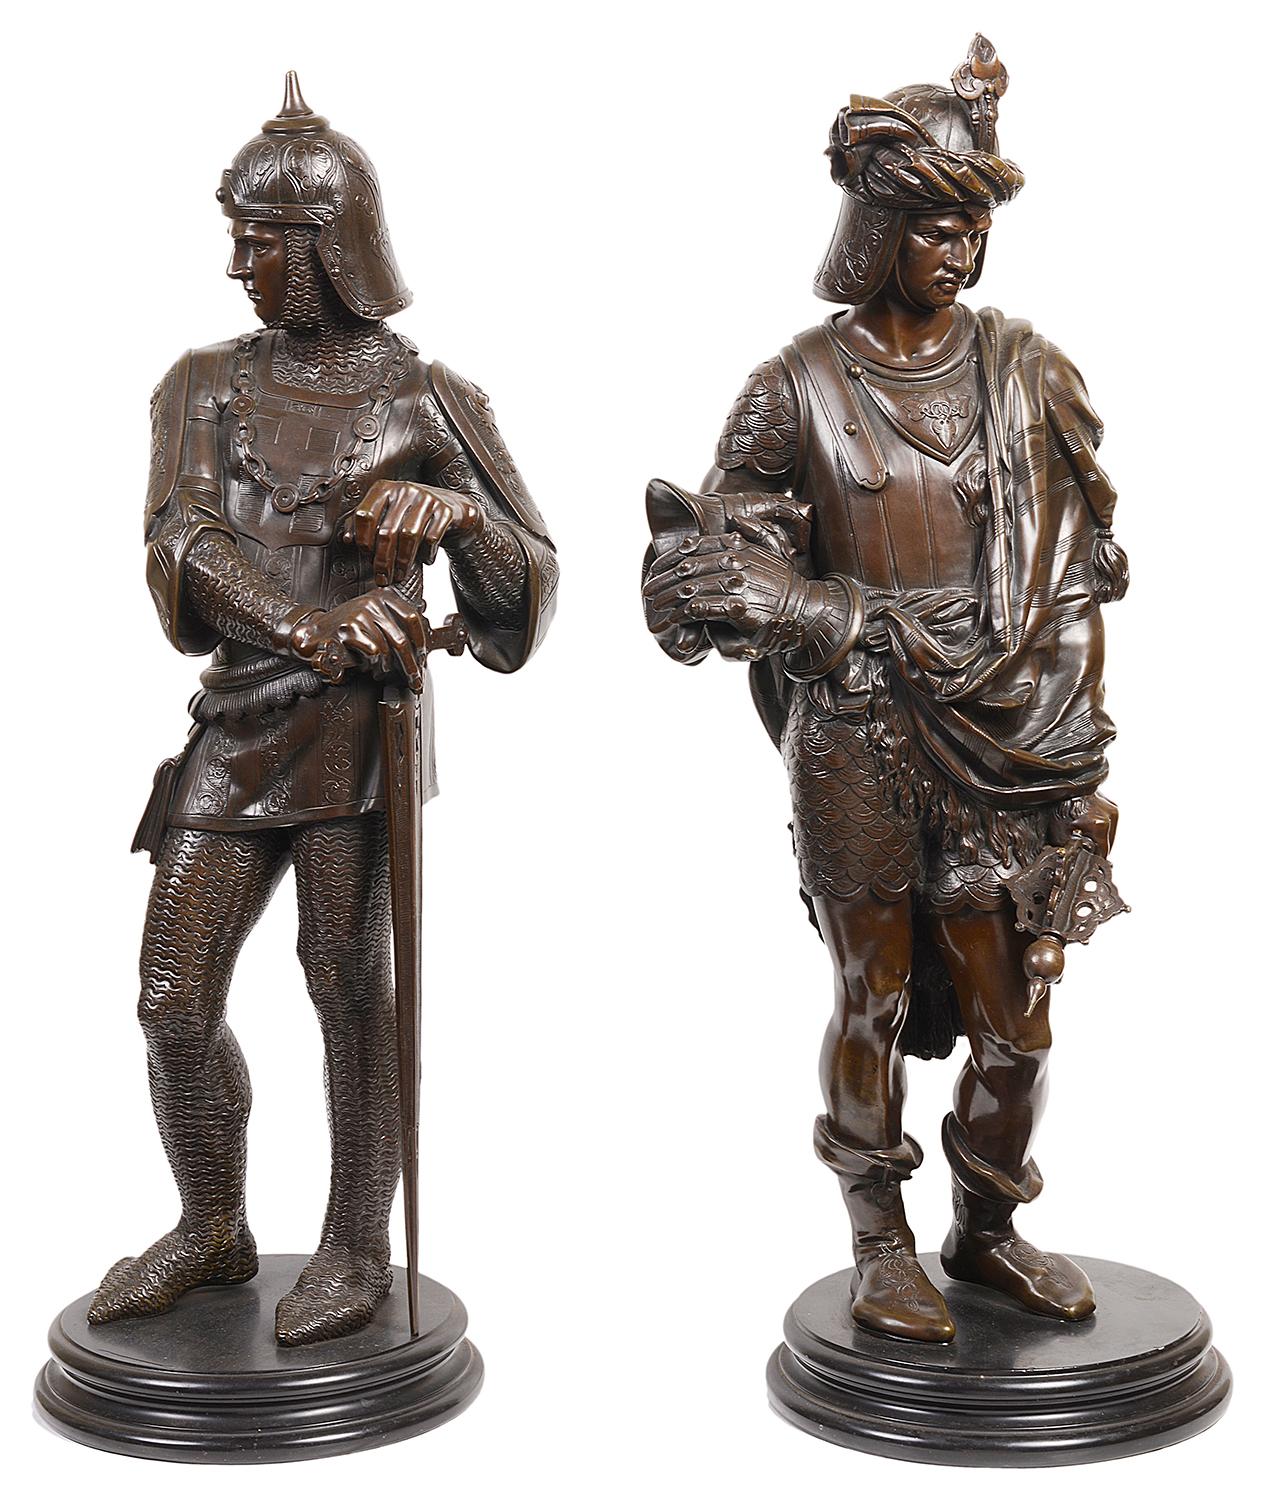 A good quality pair of 19th century French bronze statues of soldiers in their armour.

48028 BCELZE